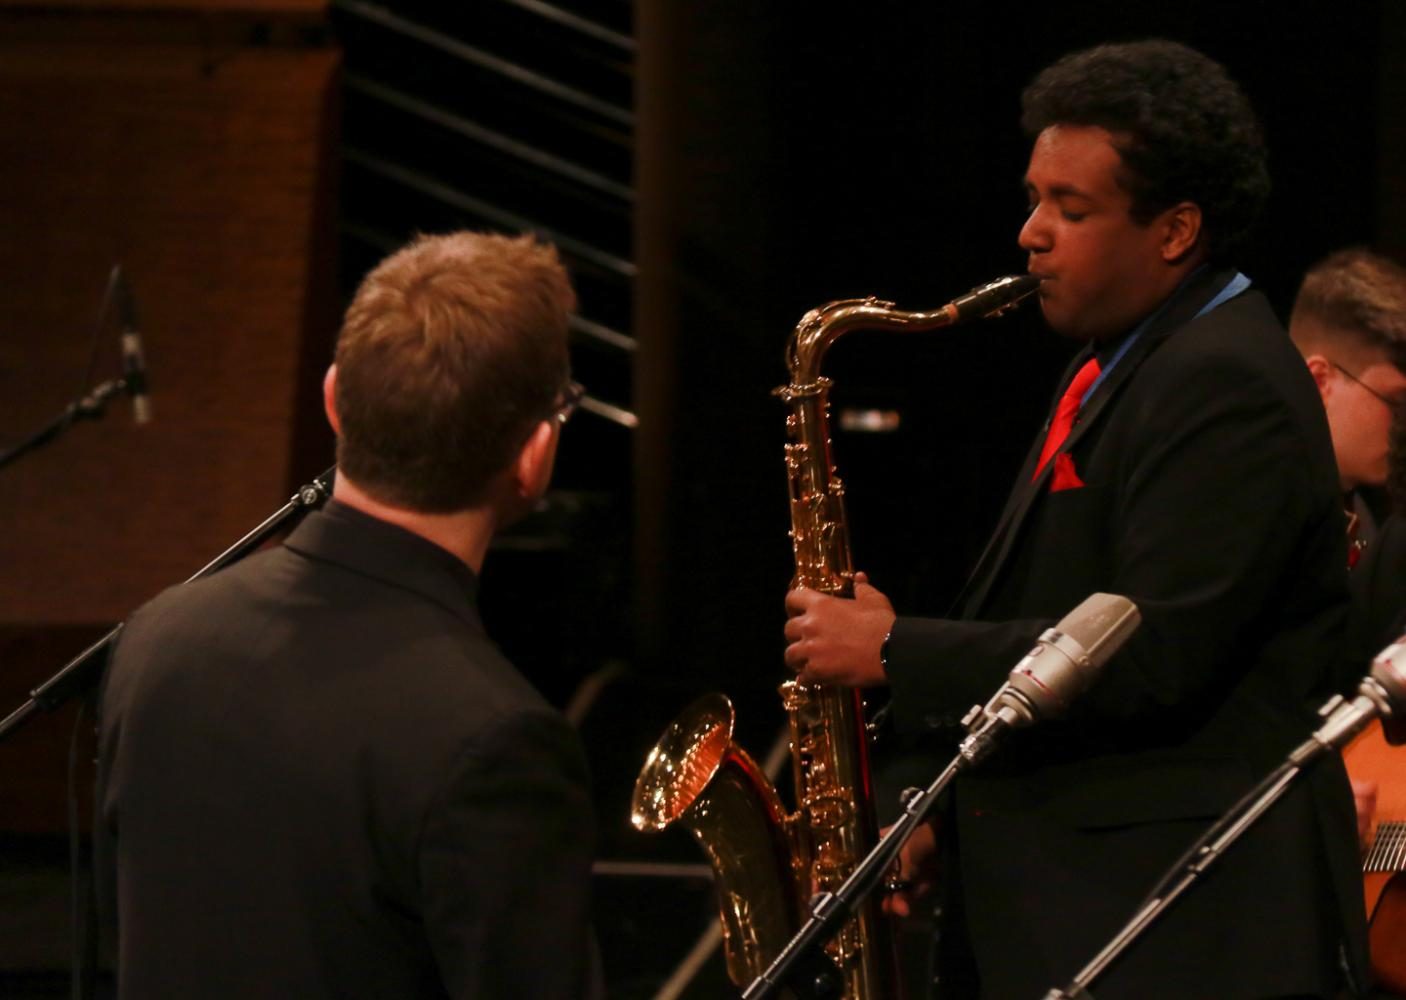 Senior Dylon Rajah solos on Such Sweet Thunder while director Darin Faul watches from the front of the stage. Today Rajah was making his dream come true, as hes been working for this moment since he began jazz.